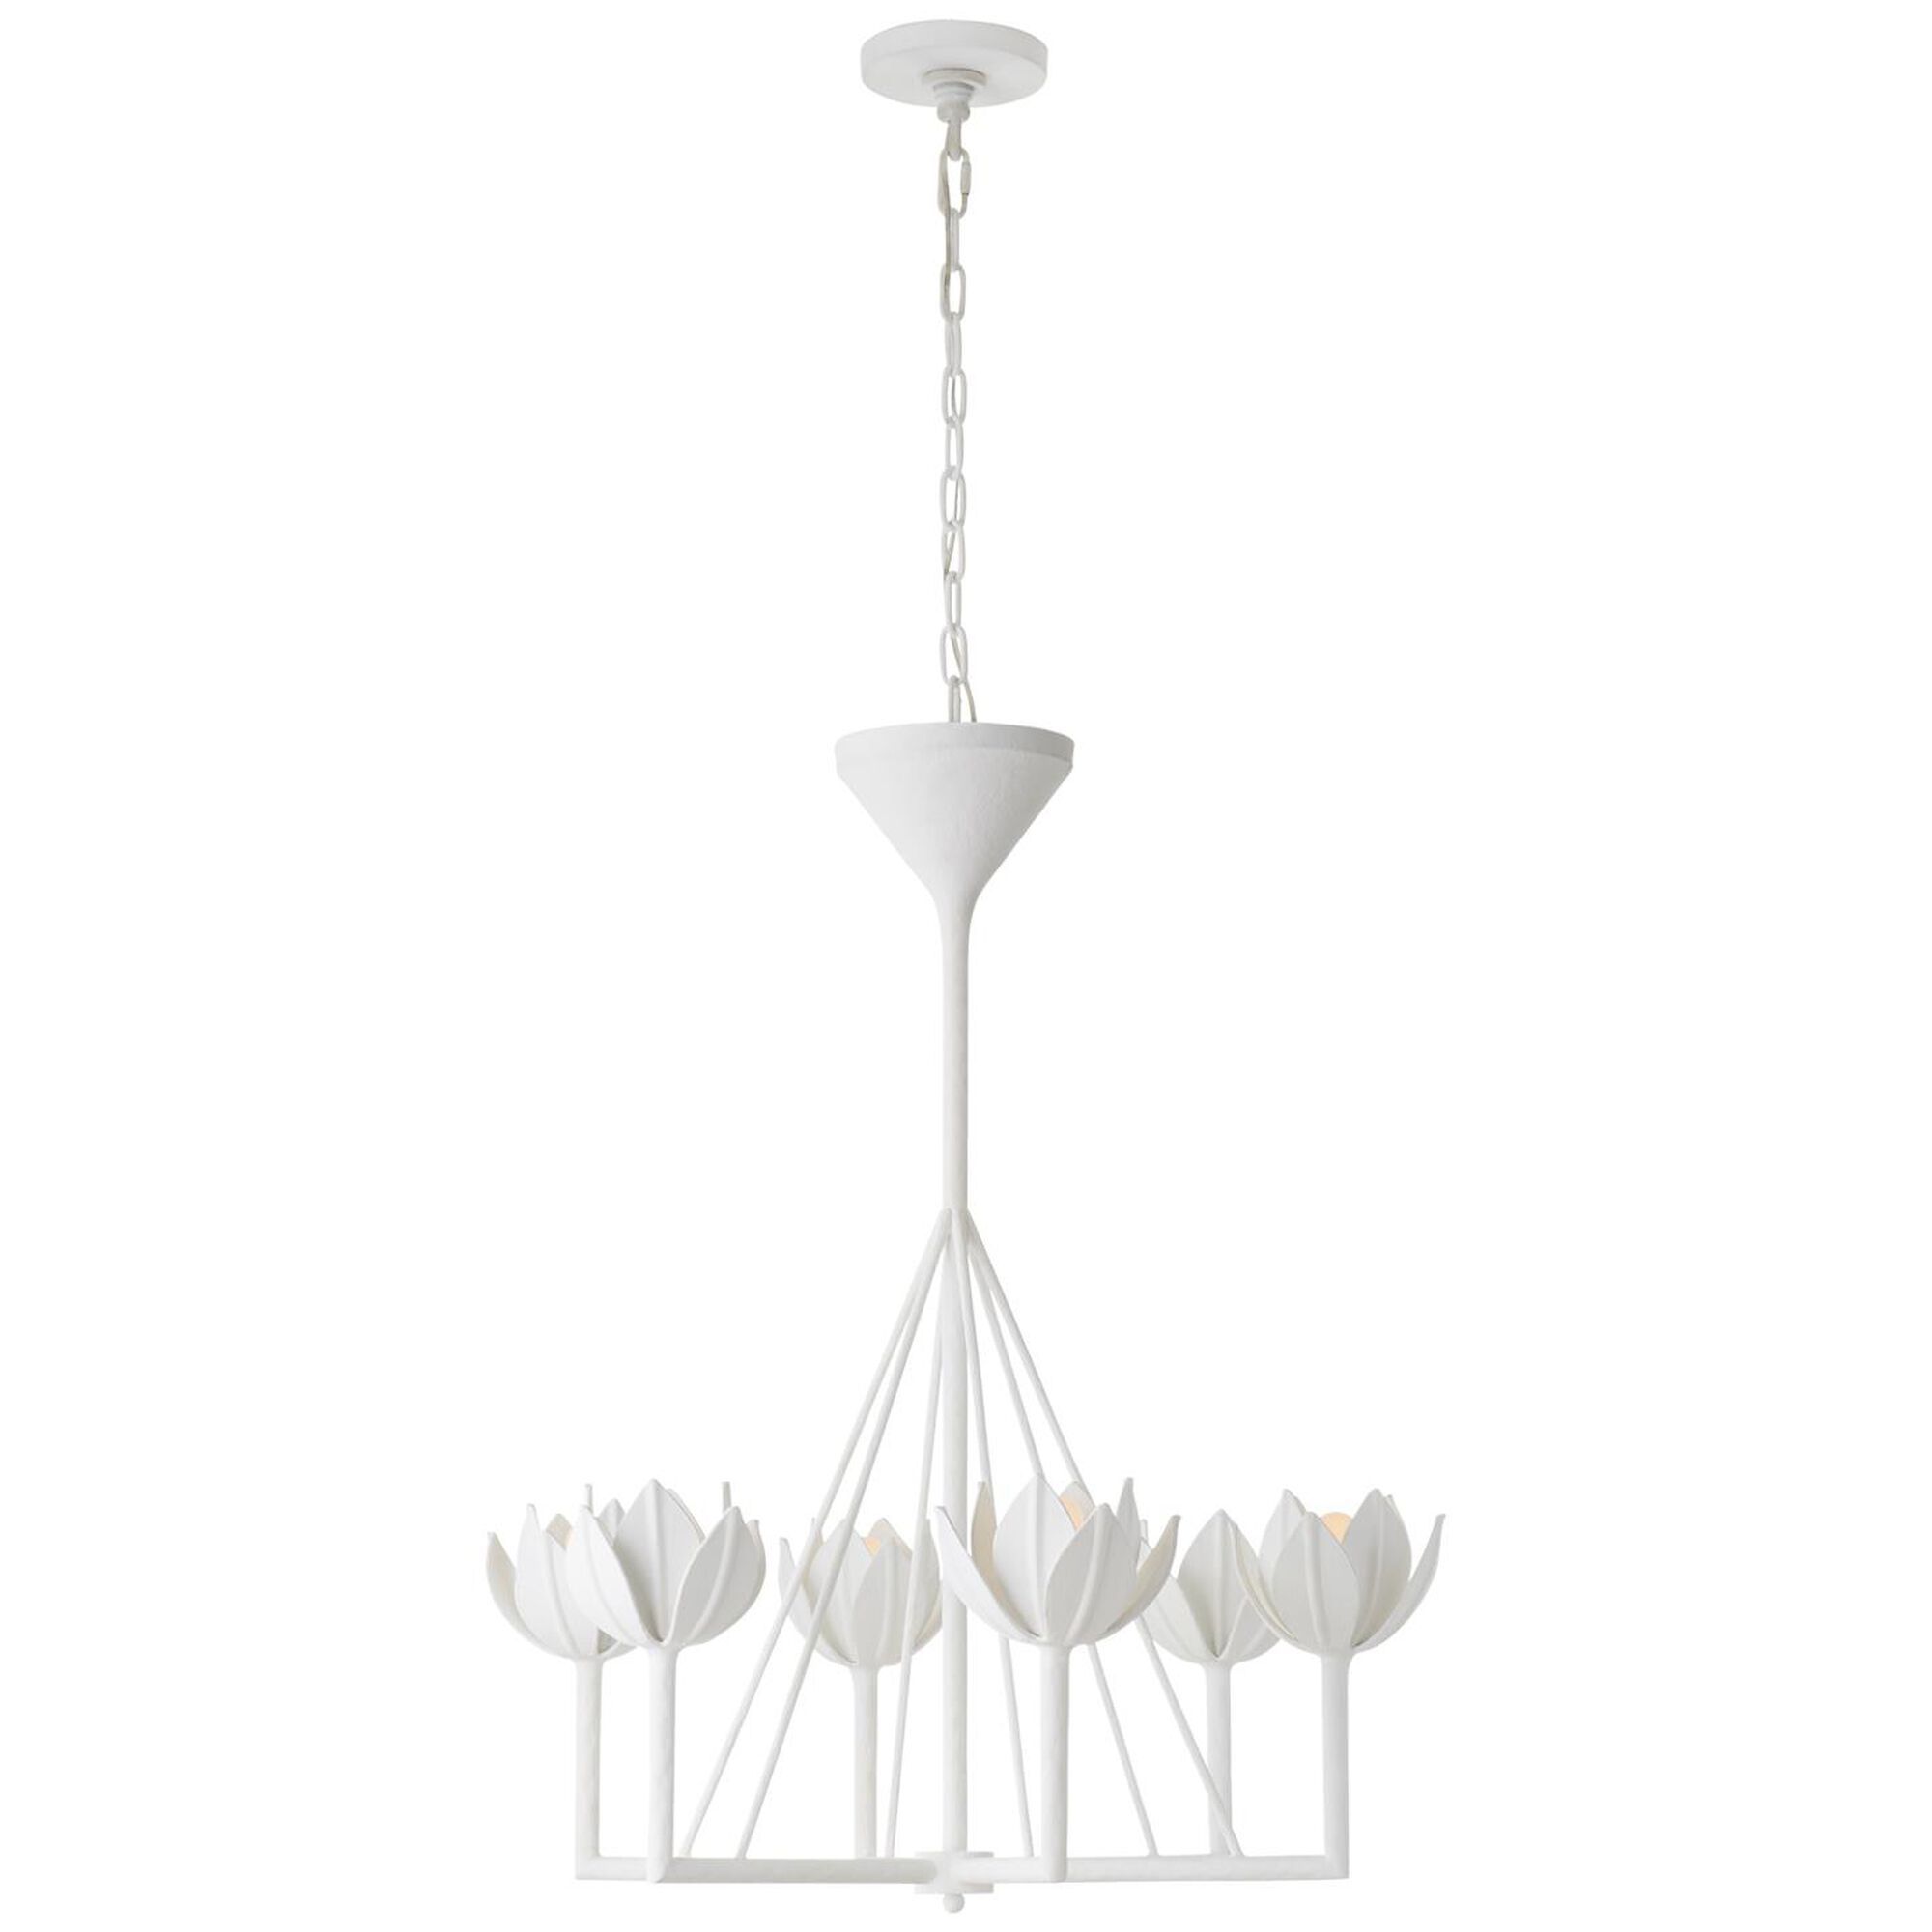 Julie Neill Alberto 30 Inch 6 Light Chandelier by Visual Comfort and Co. | Capitol Lighting 1800lighting.com